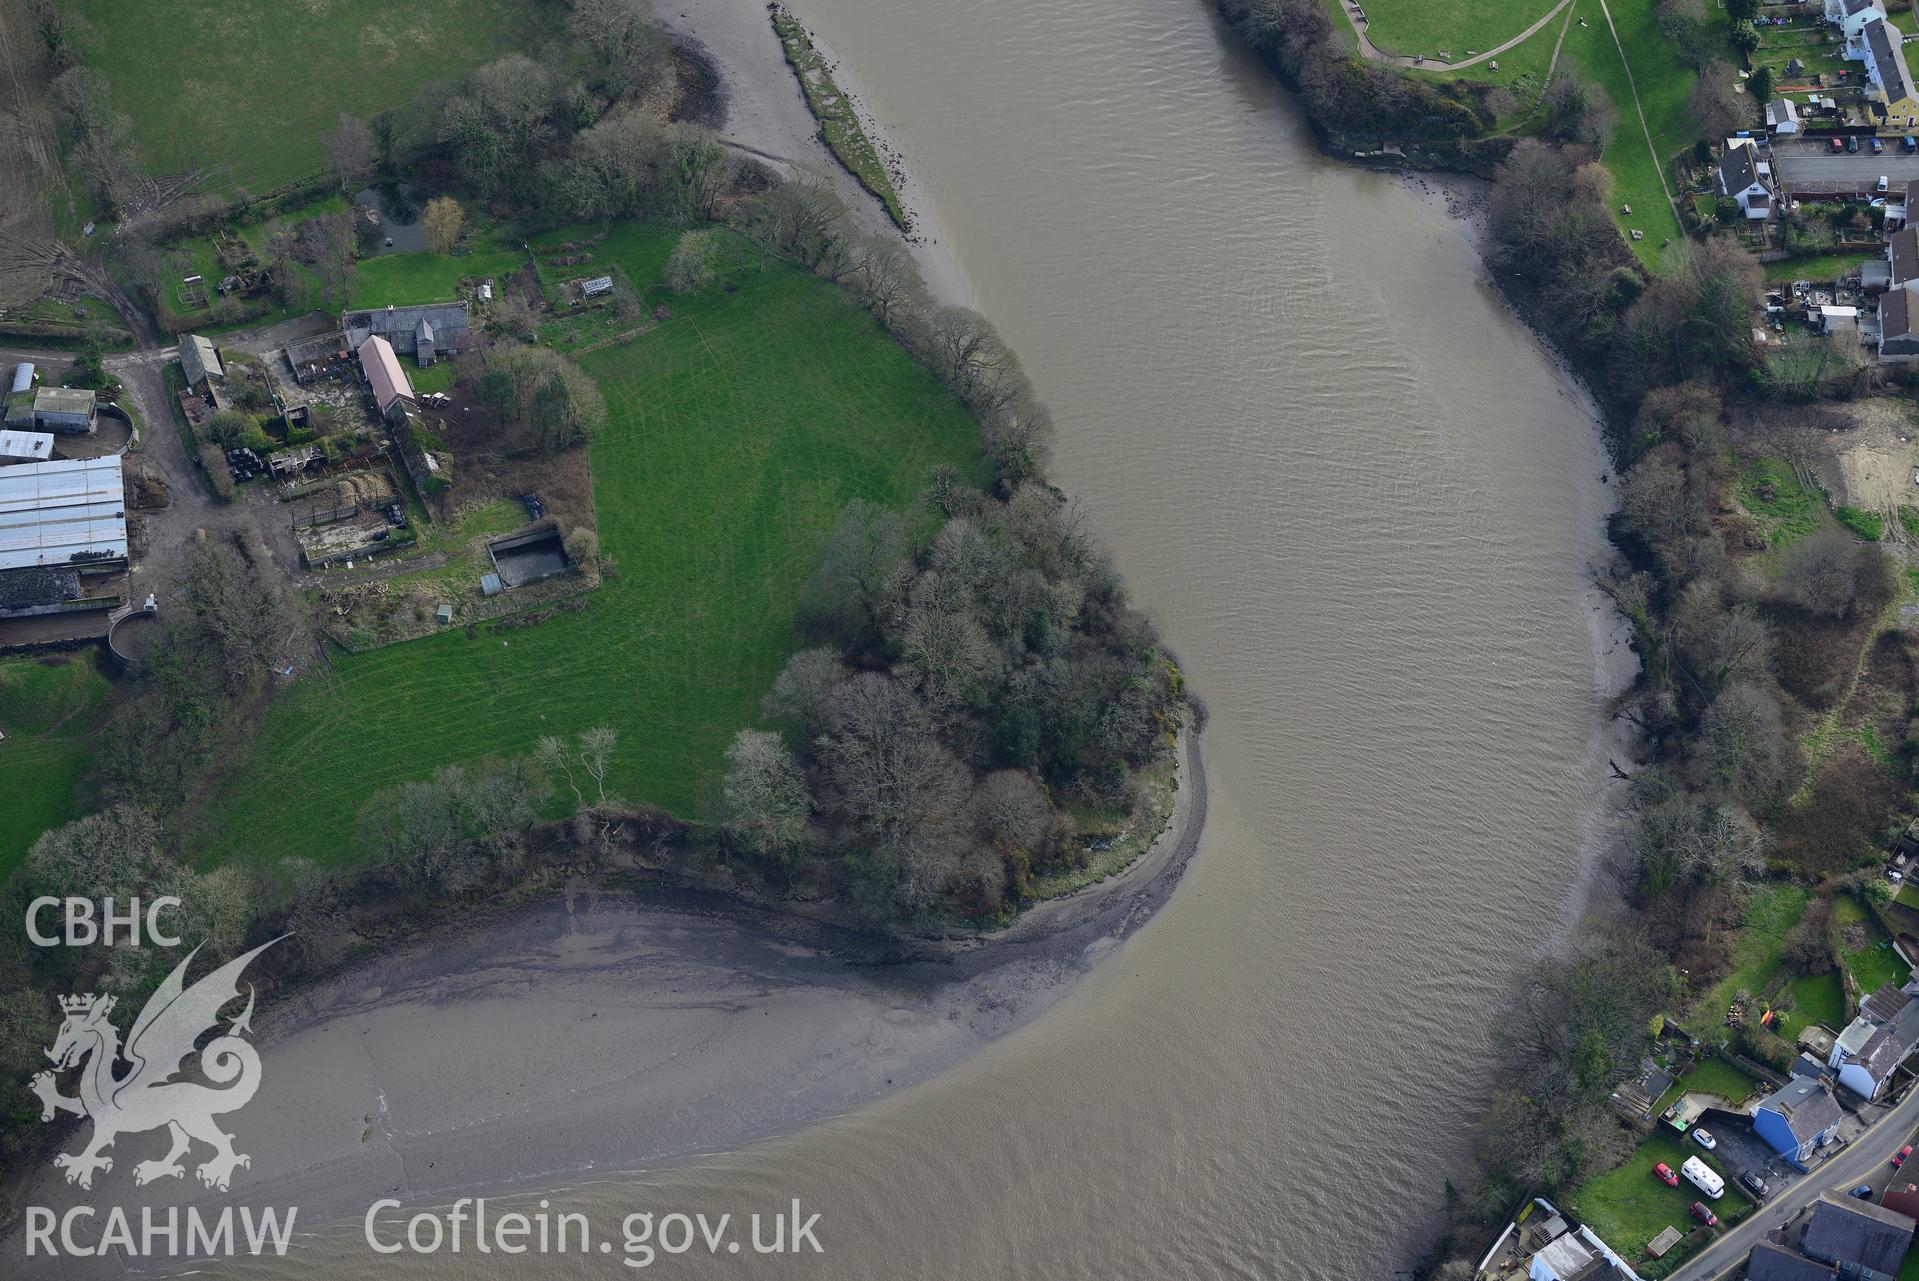 Cardigan old castle on the banks of the Teifi river. Oblique aerial photograph taken during the Royal Commission's programme of archaeological aerial reconnaissance by Toby Driver on 13th March 2015.